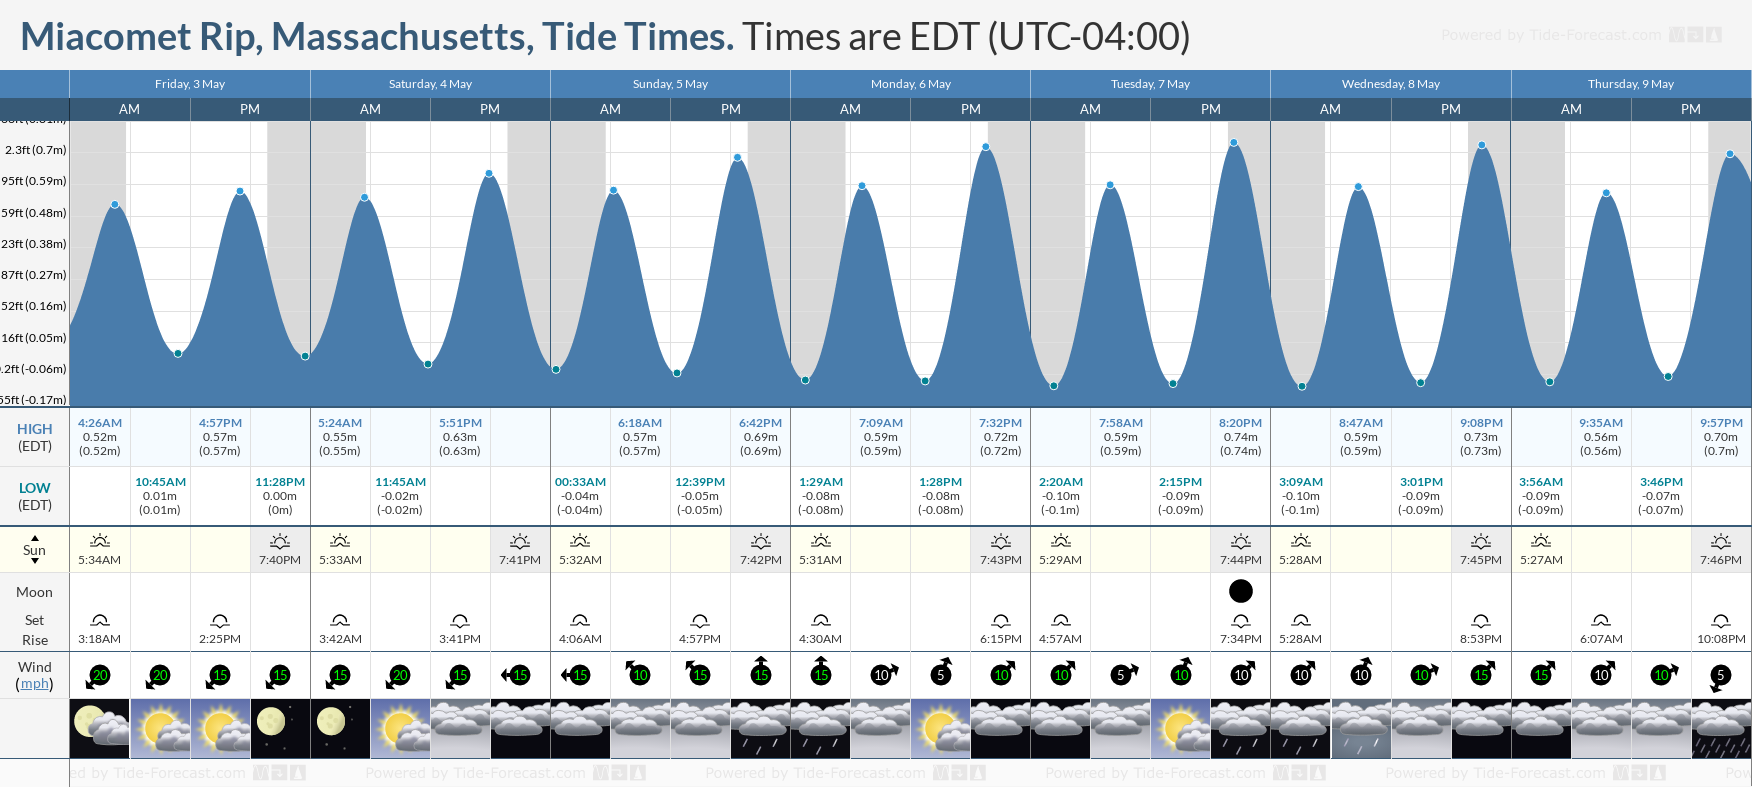 Miacomet Rip, Massachusetts Tide Chart including high and low tide tide times for the next 7 days